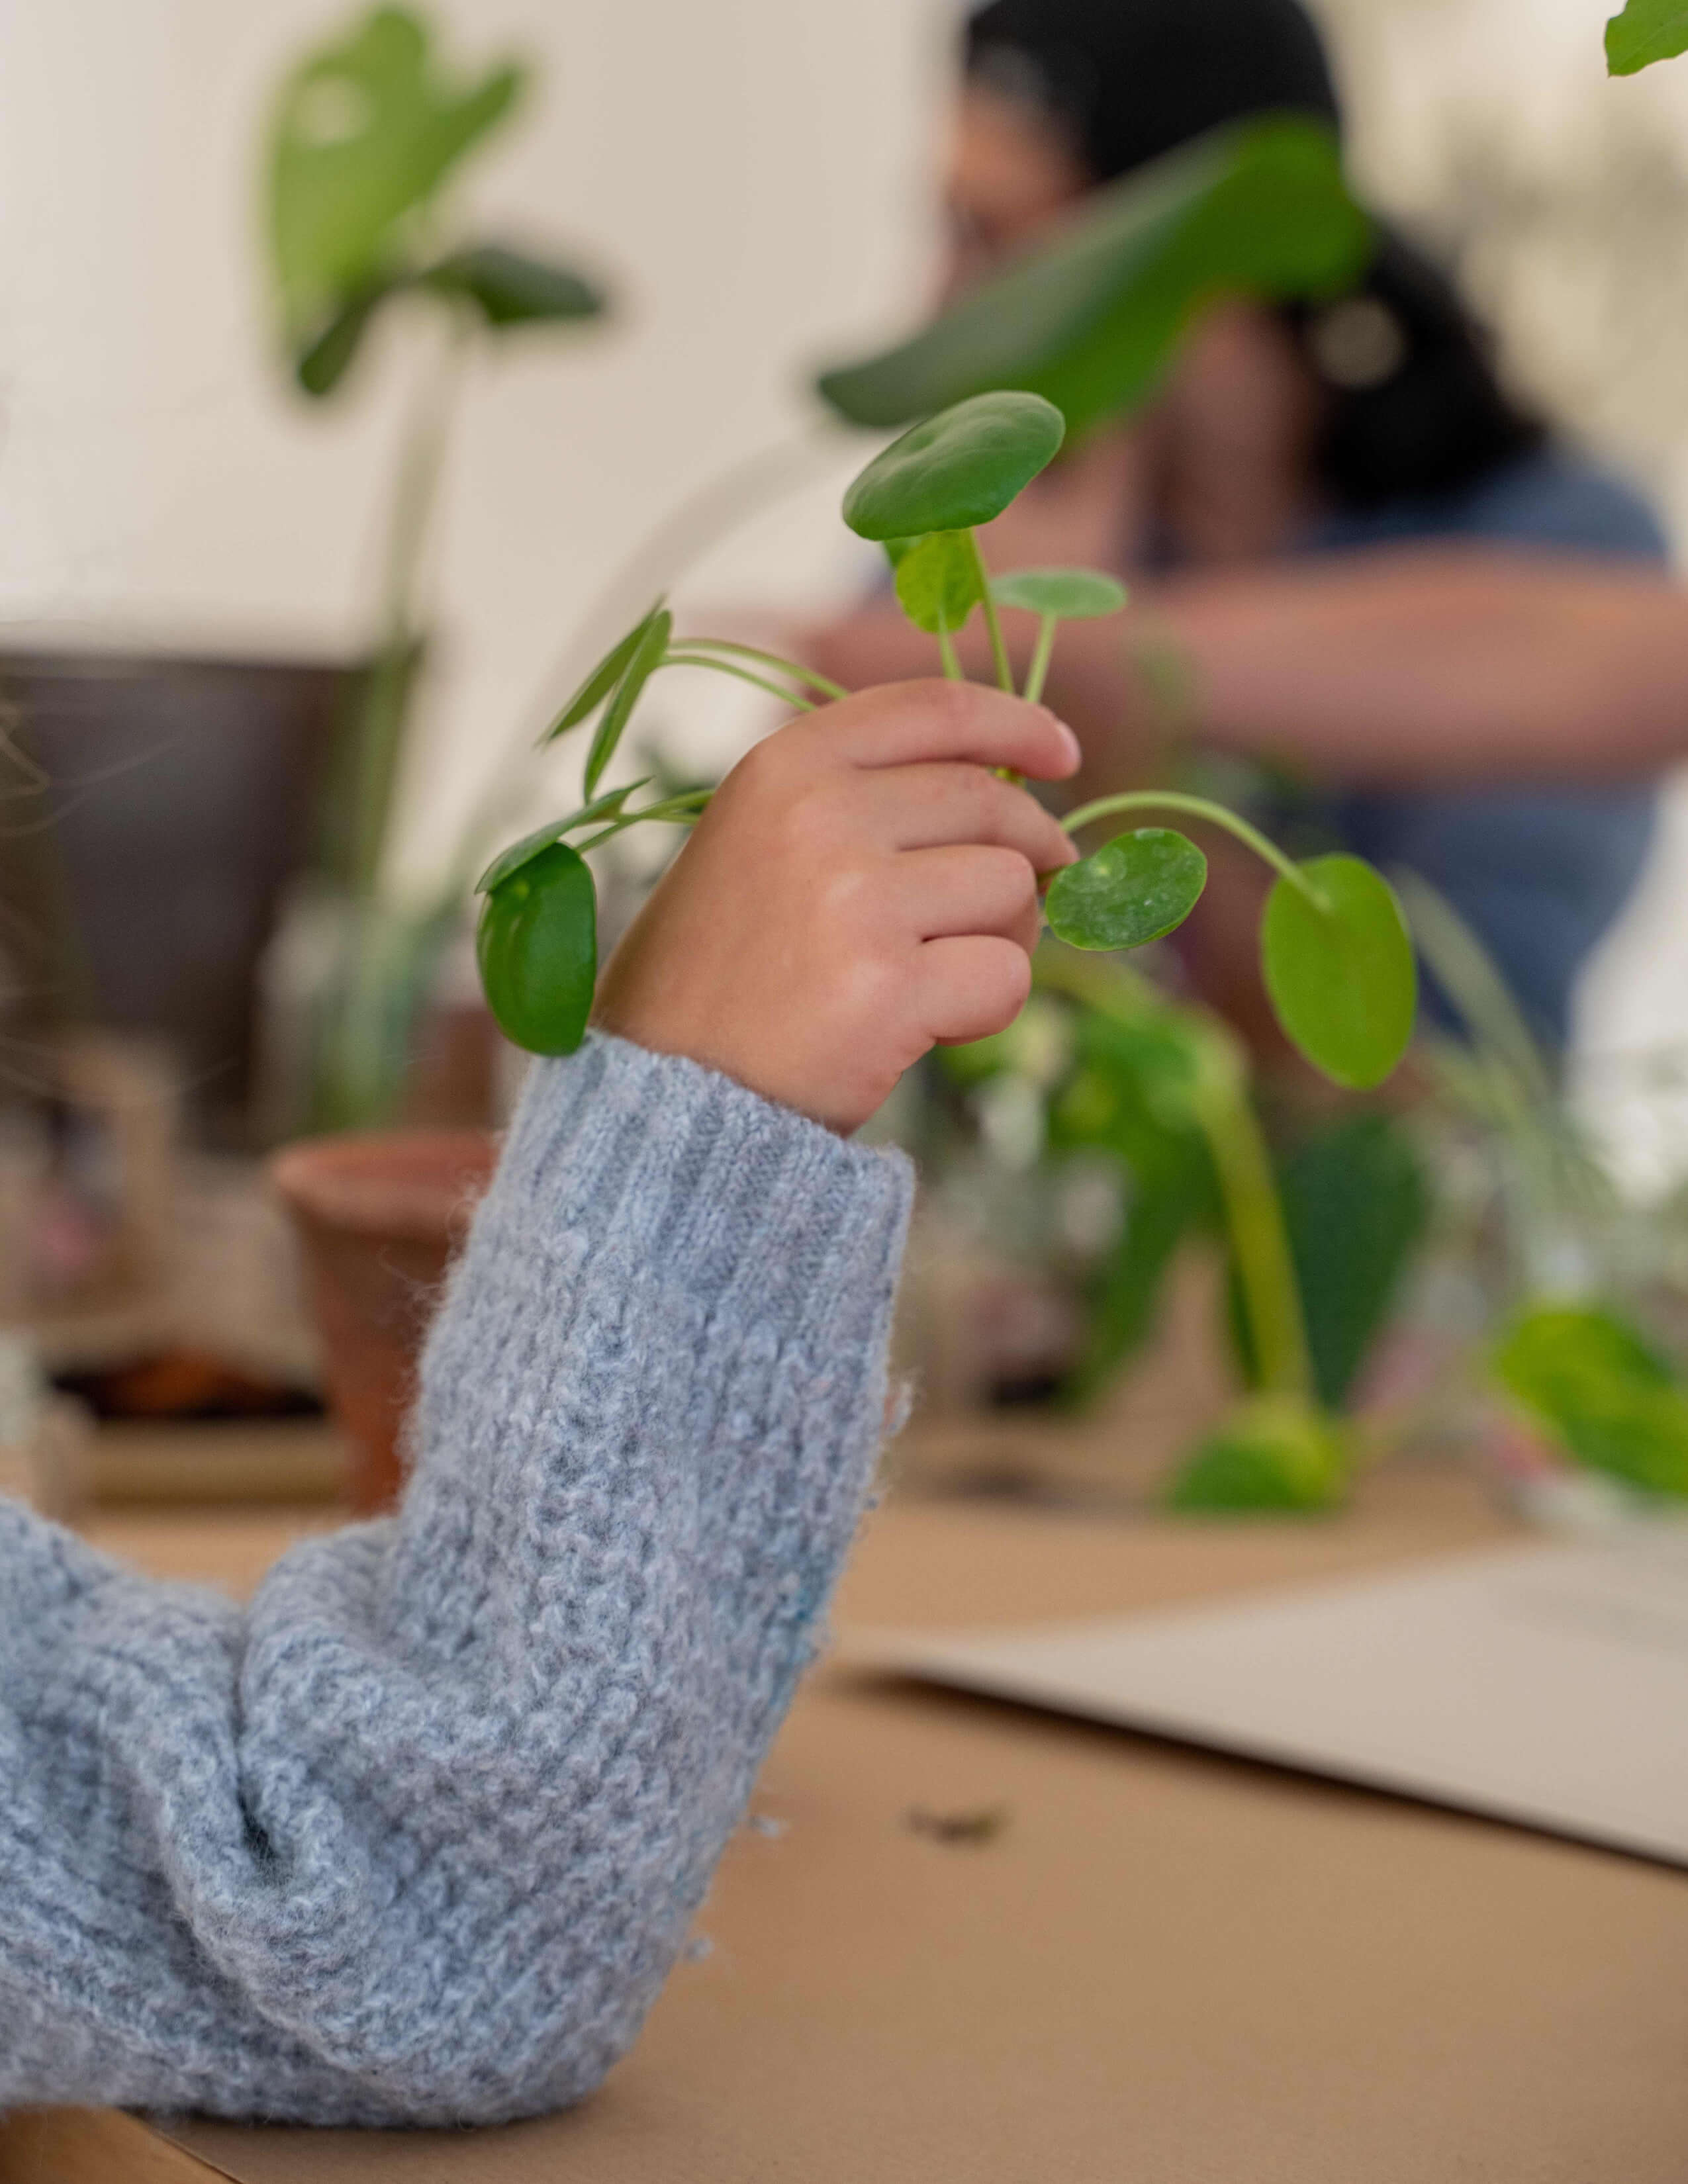 A kid held a plant - a Chinese money plant in their hand on the table.